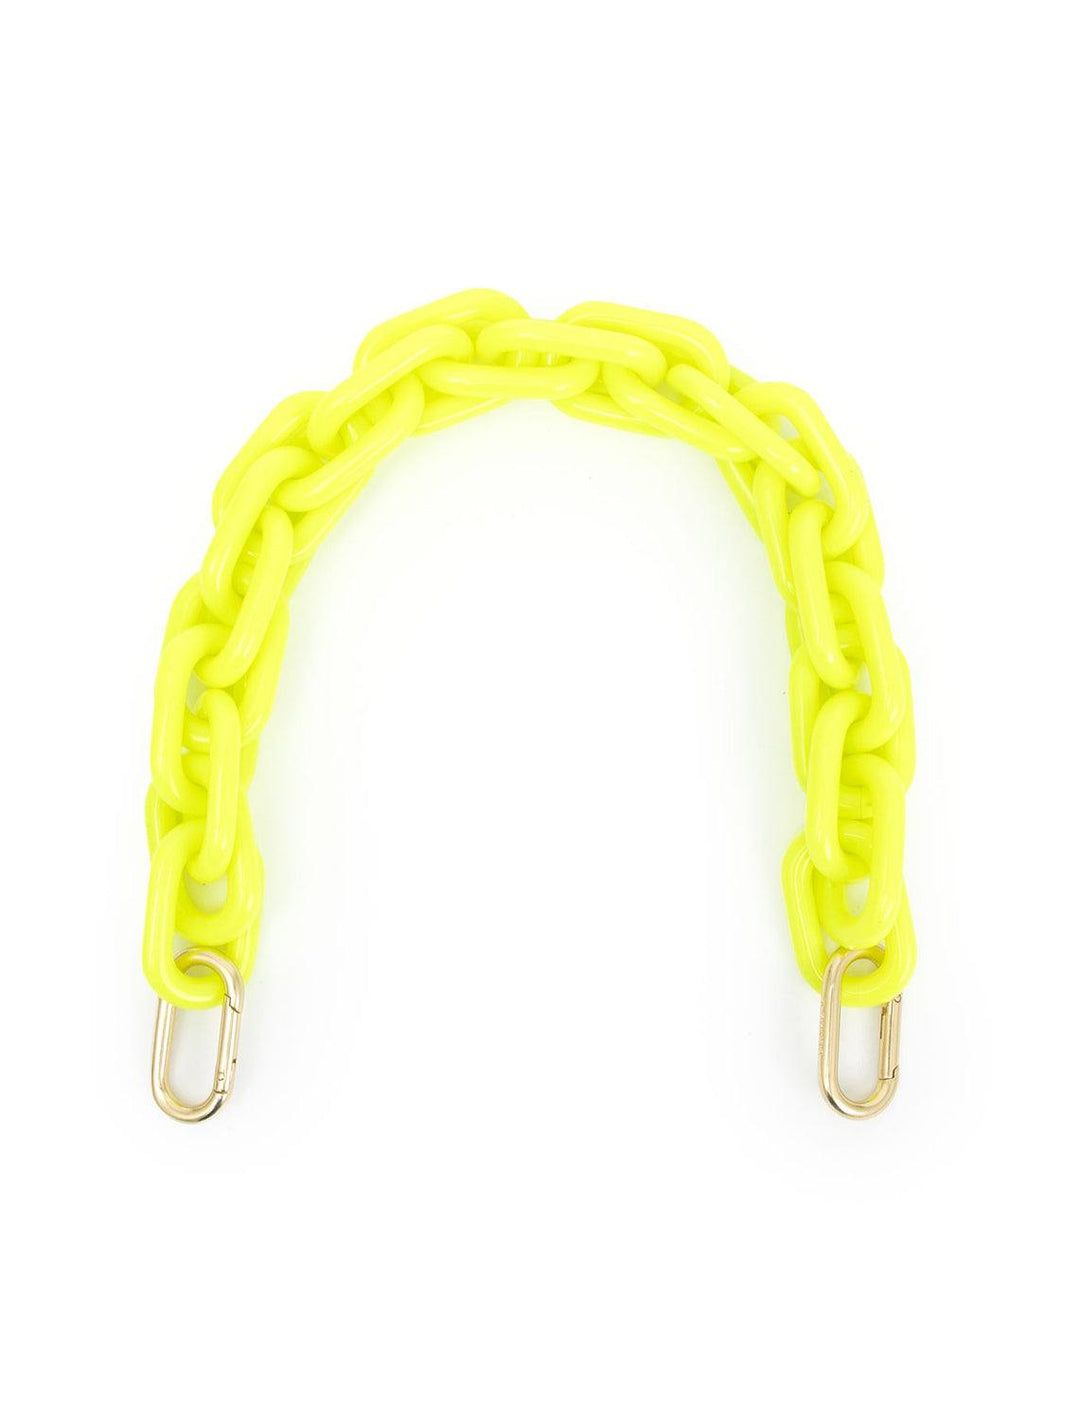 flat view of shortie strap in neon yellow